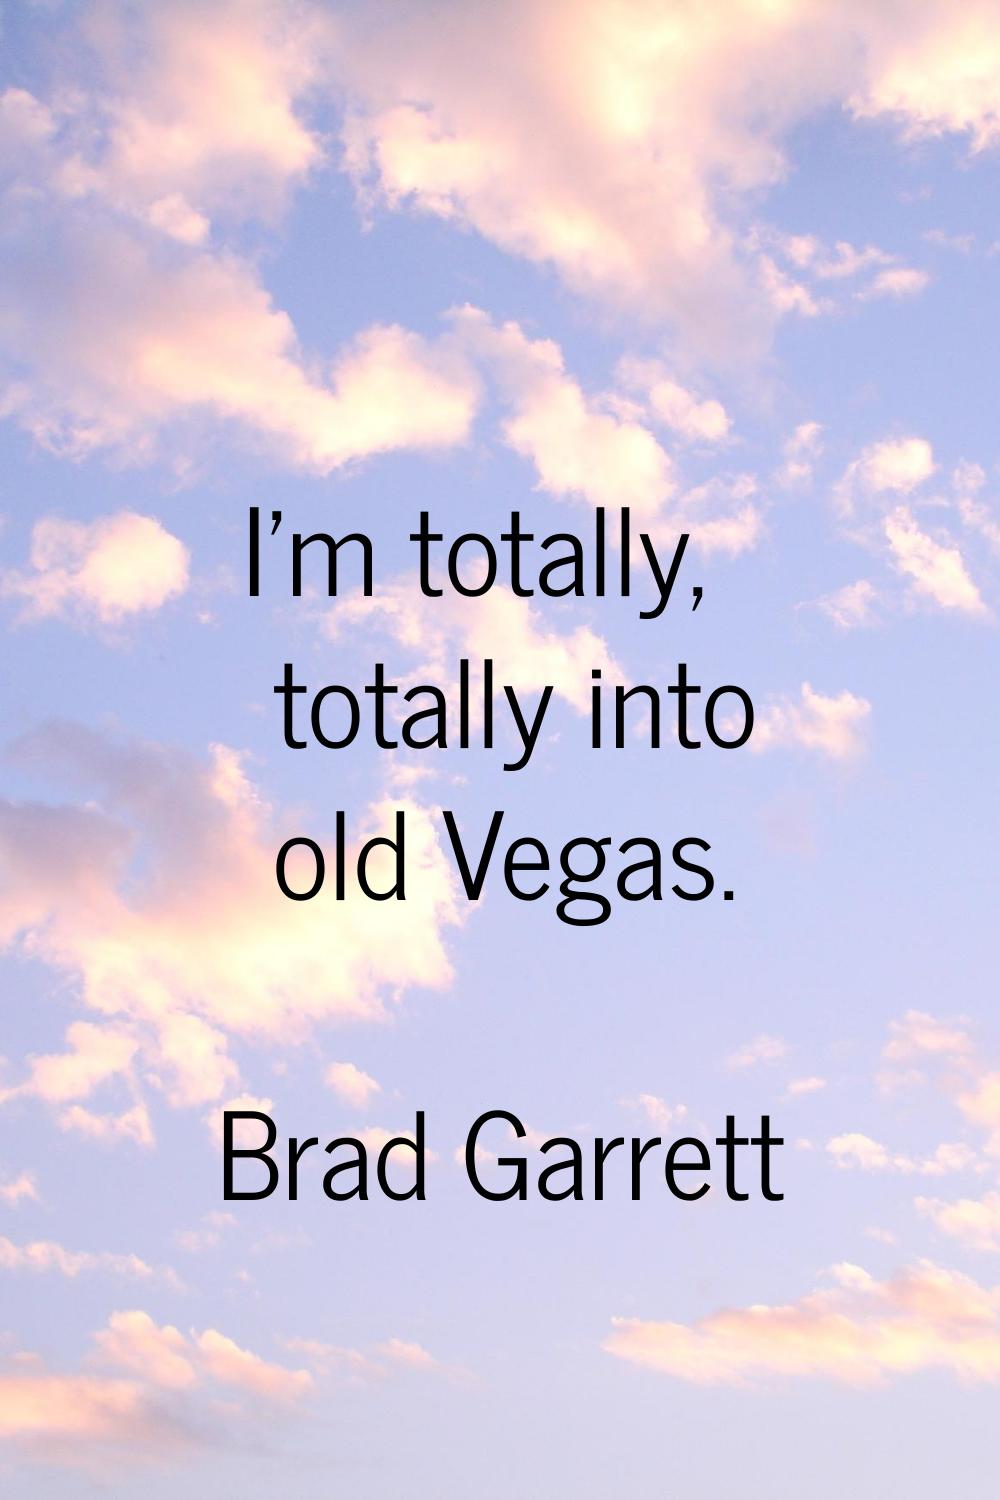 I'm totally, totally into old Vegas.